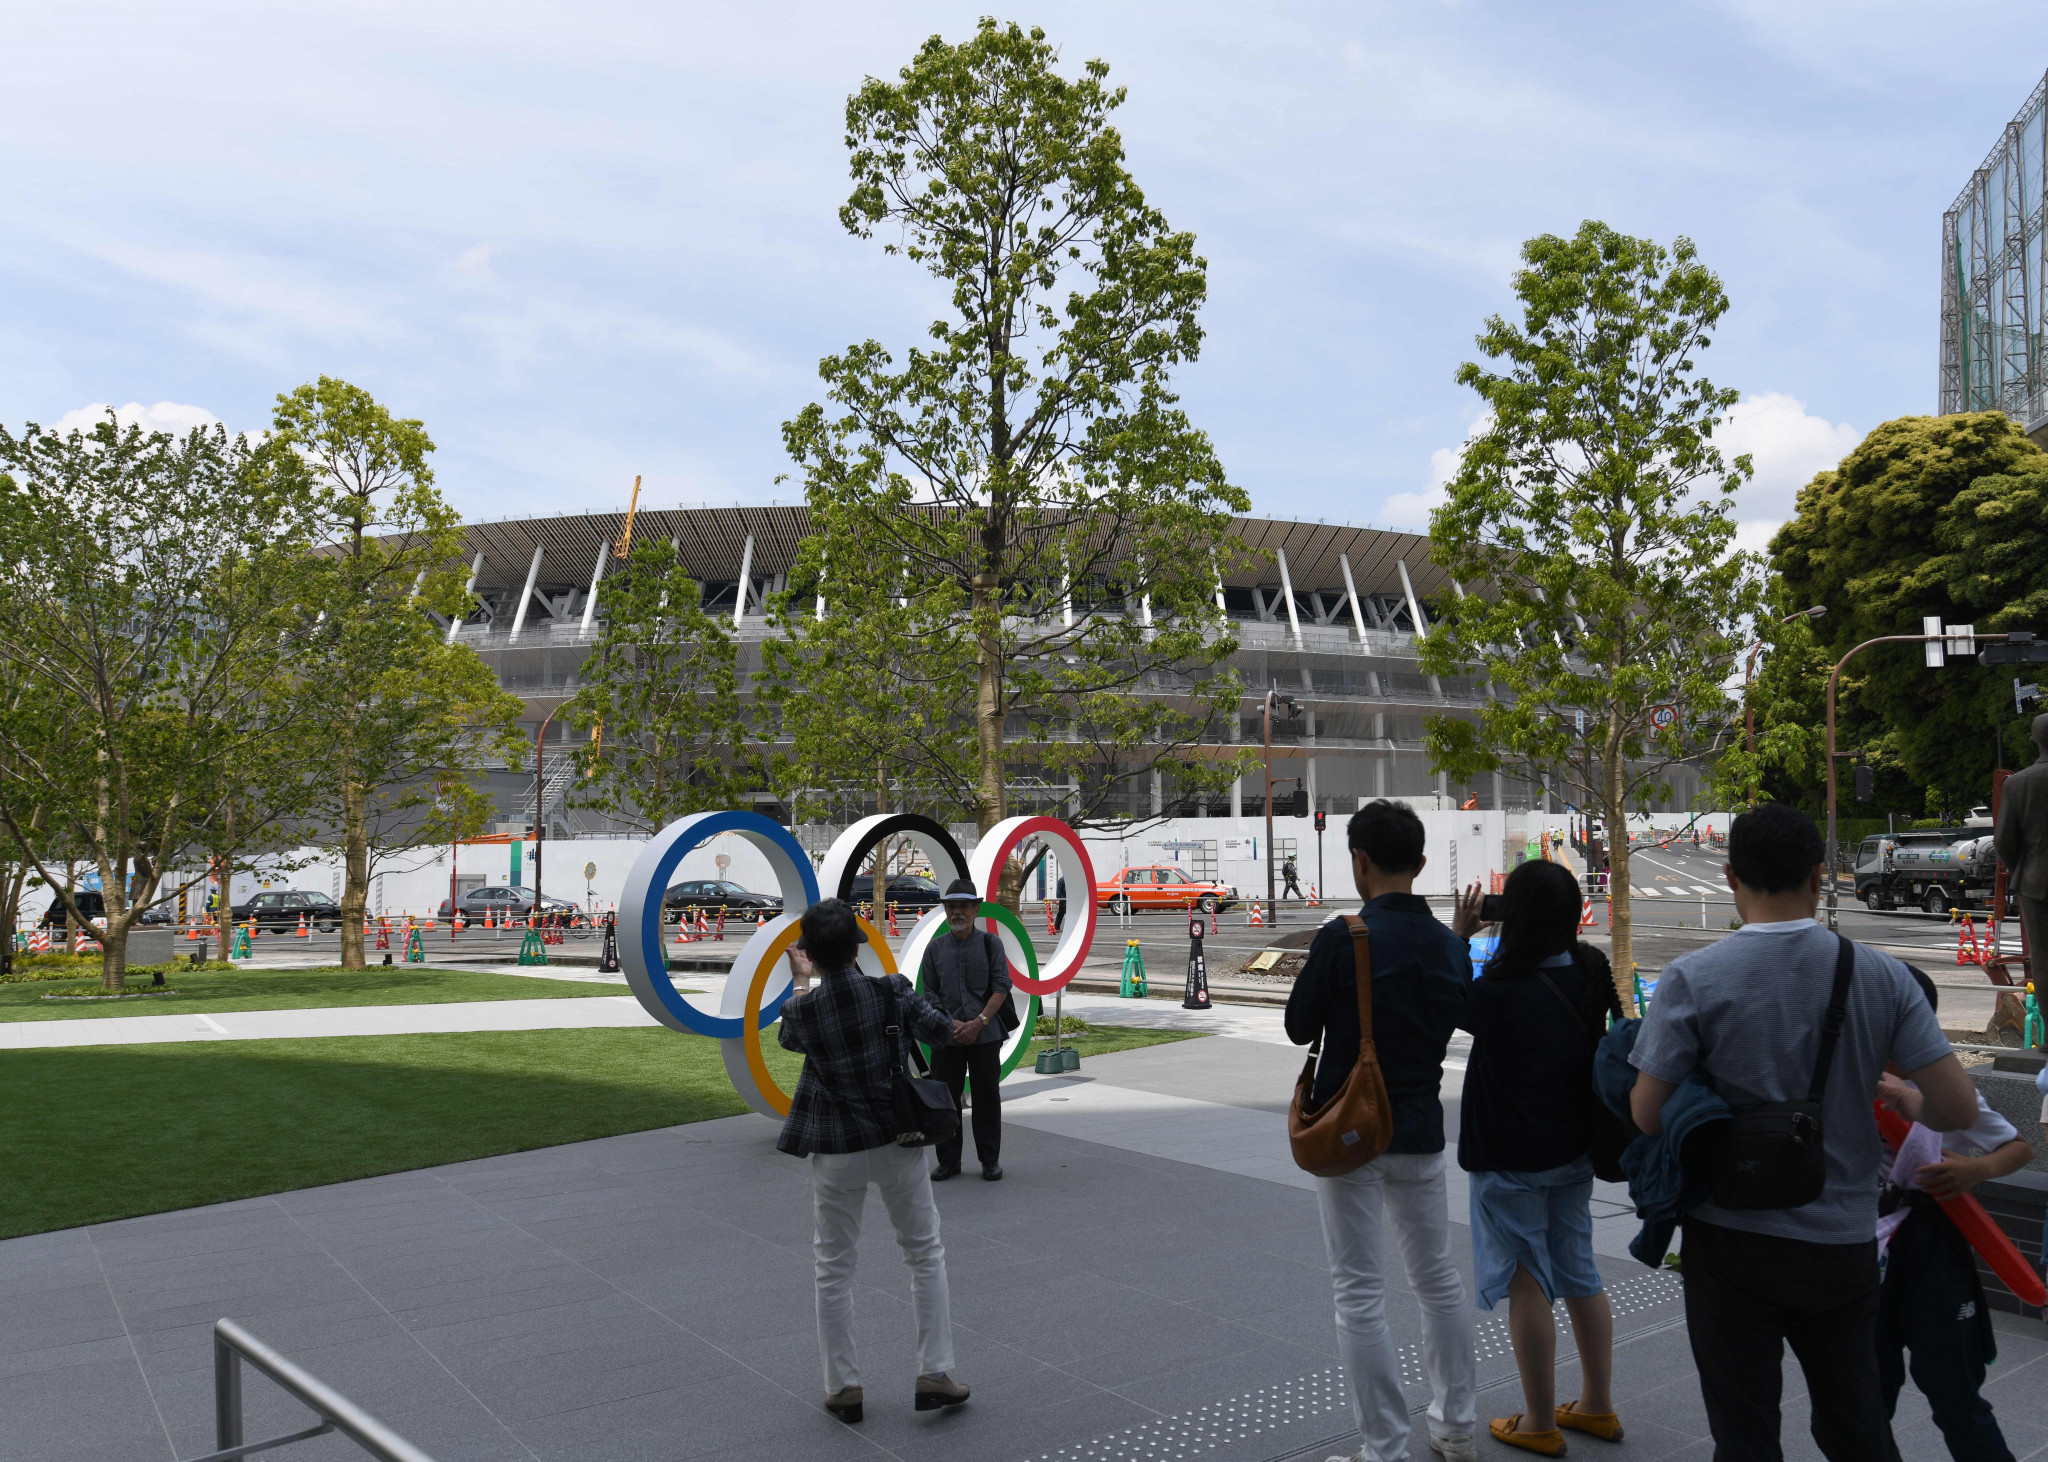 The building is located directly in front of Tokyo's Olympic Stadium, which is currently under construction for the 2020 Games ©Getty Images